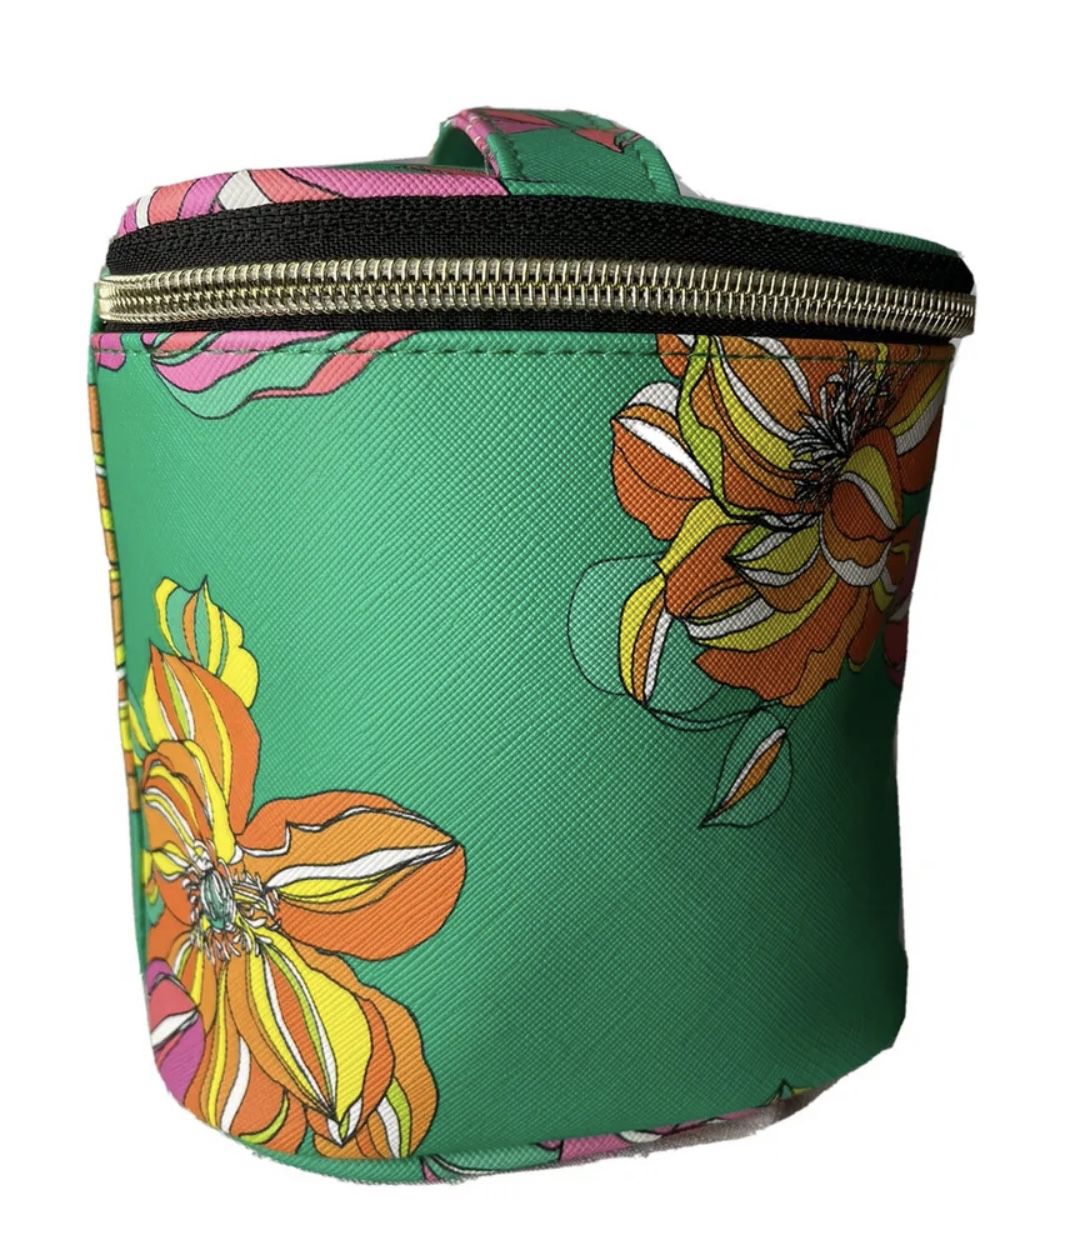 TRINA TURK Makeup Bag Cosmetic Travel Case for Sale in Brooklyn